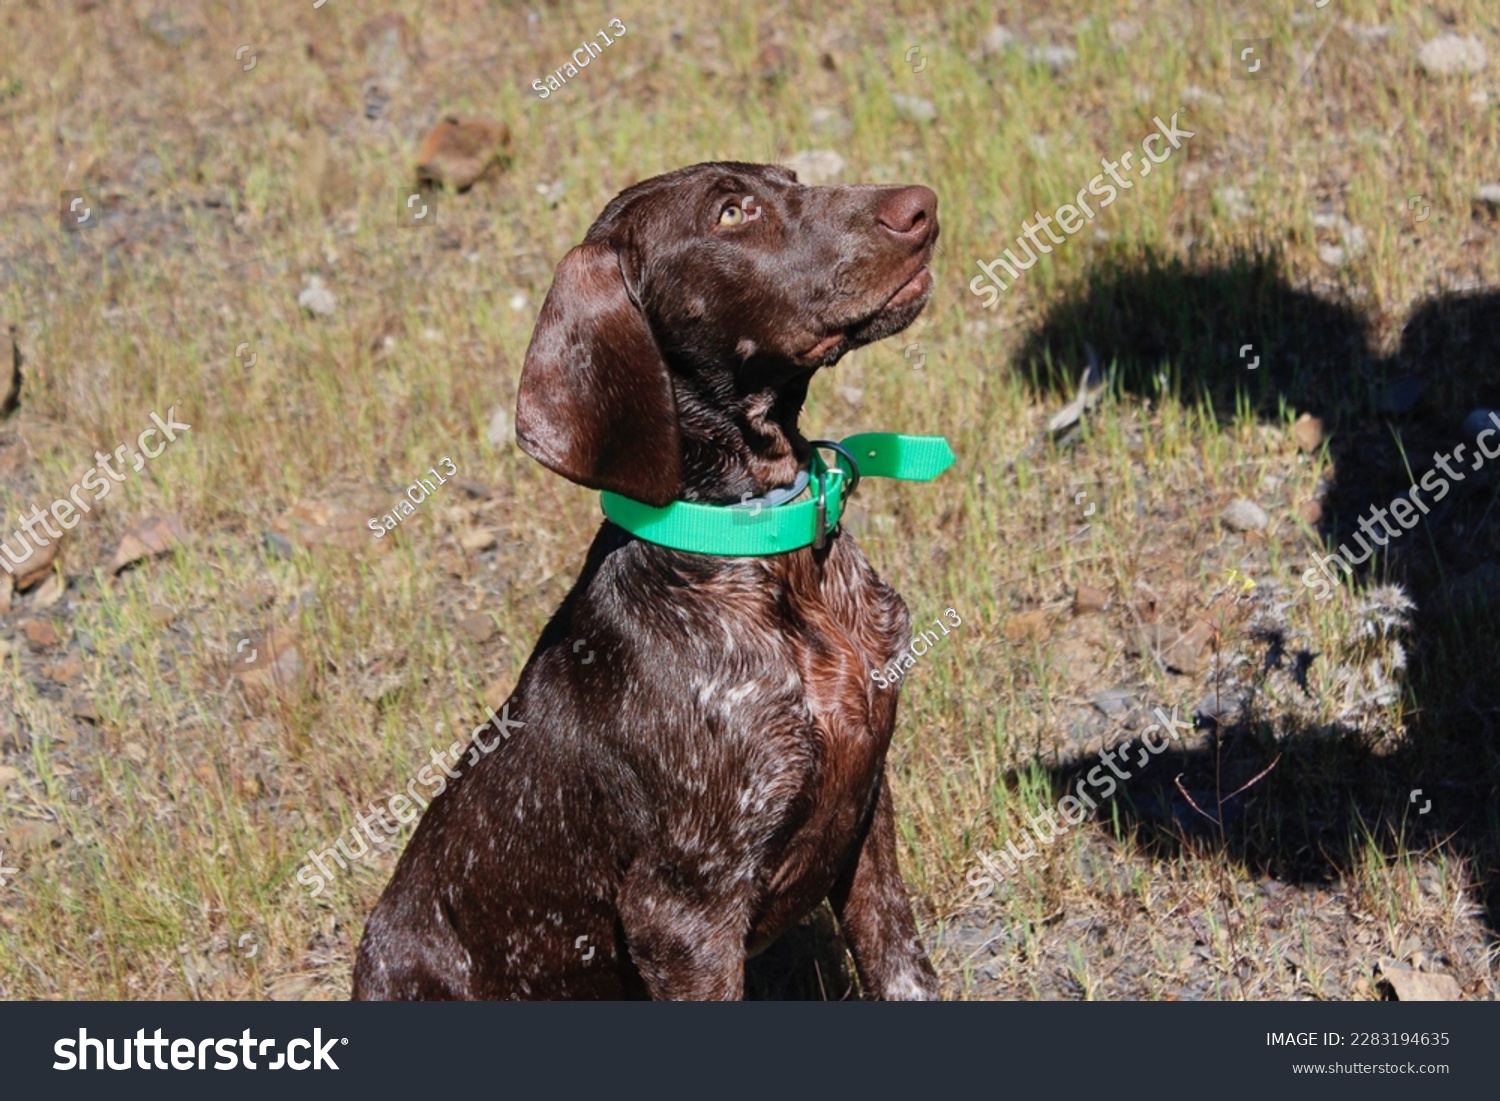 Portrait of a happy dog wearing a green collar. Its fur is brown with white dots. The puppy is looking at its owner while being trained. Learning how to sit. background surrounded by grass. Man shadow #2283194635